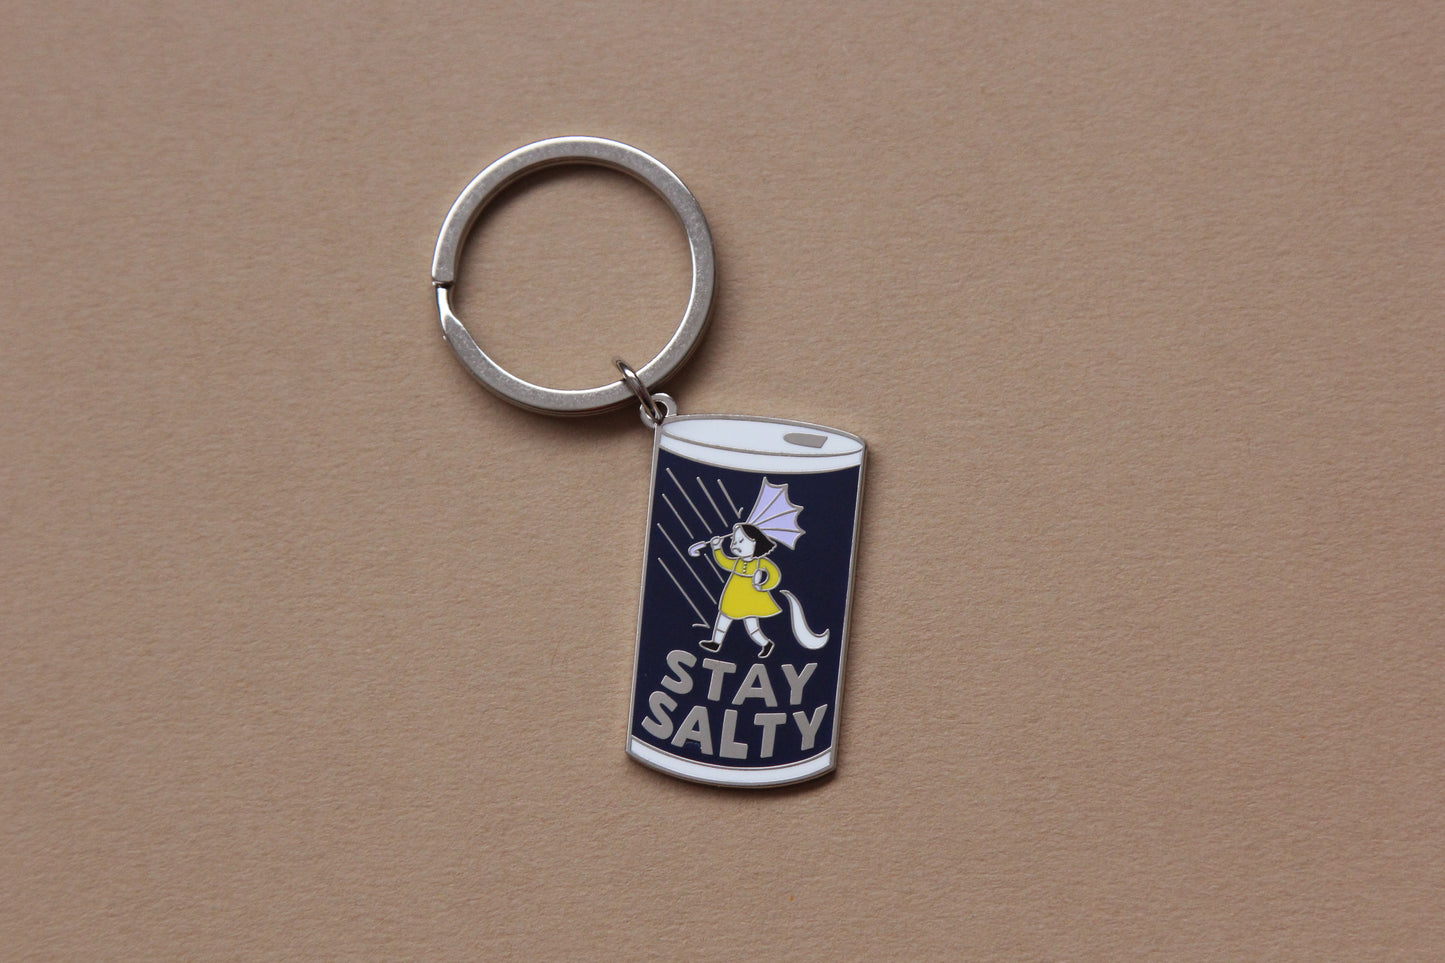 An enamel keychain showing a grumpy girl on a salt can that says "Stay Salty" over a tan background.